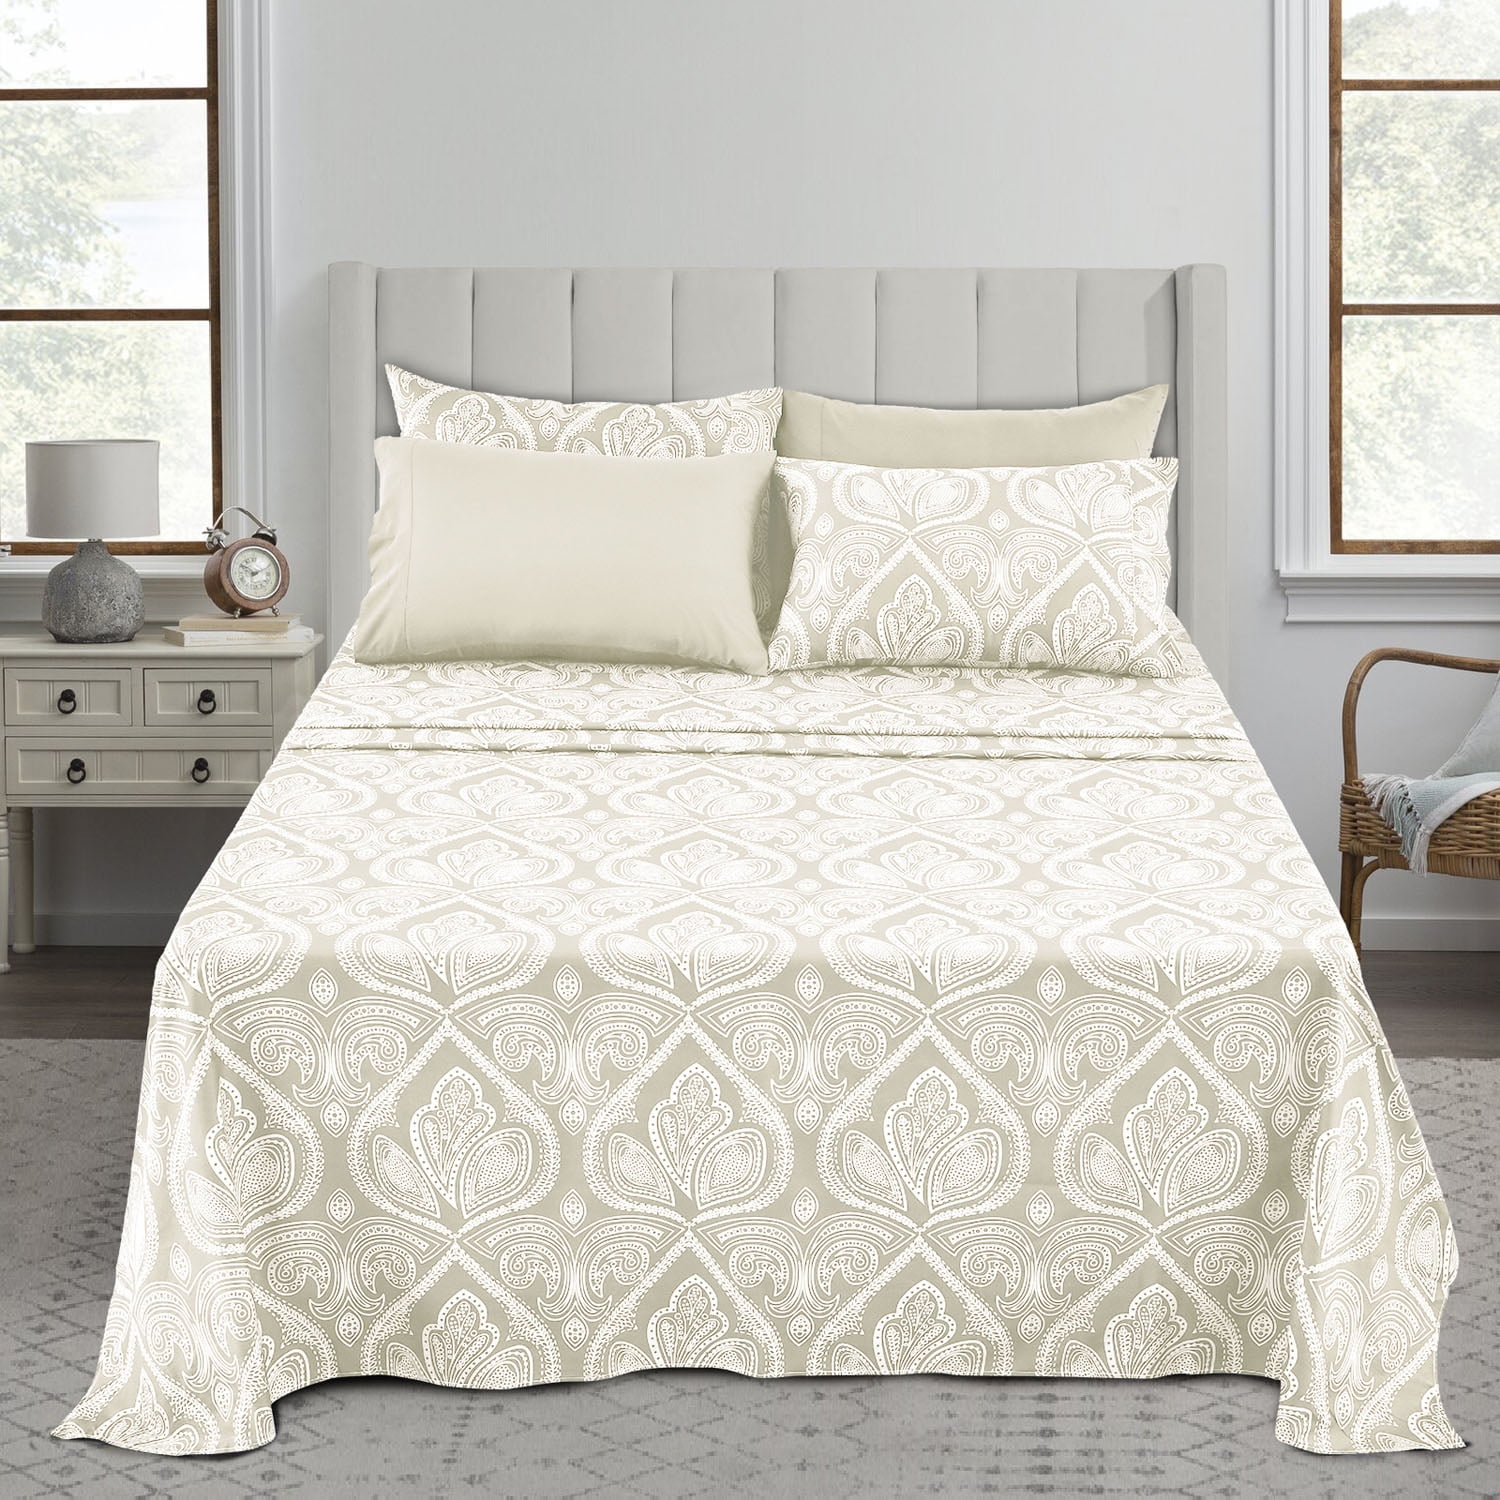 Details about   Select Set Home Bedding Items 1000 TC Soft Egyptian Cotton Twin Size All Colors 